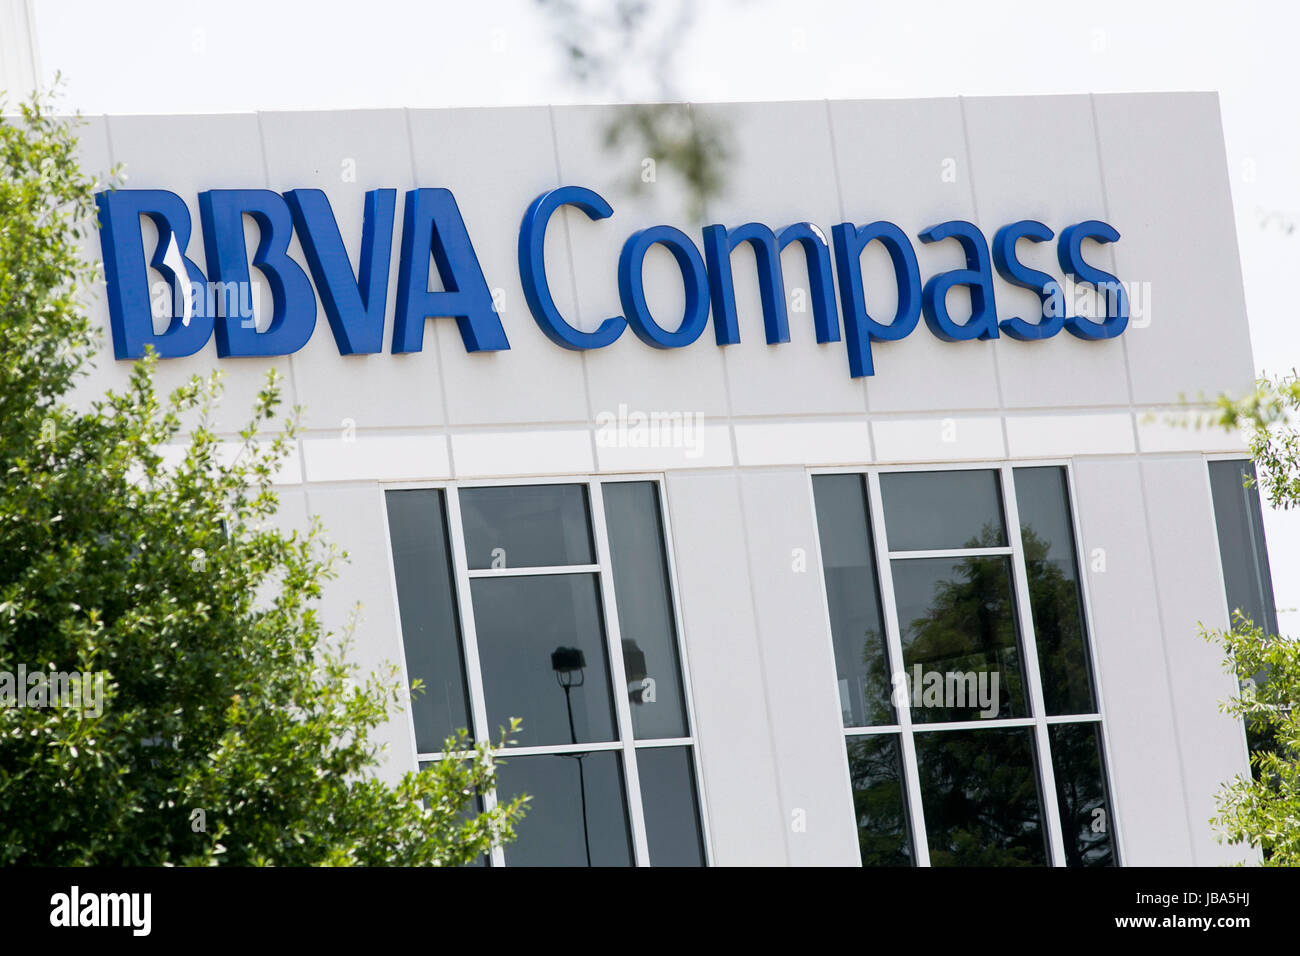 Bbva compass hi-res stock photography and images - Alamy